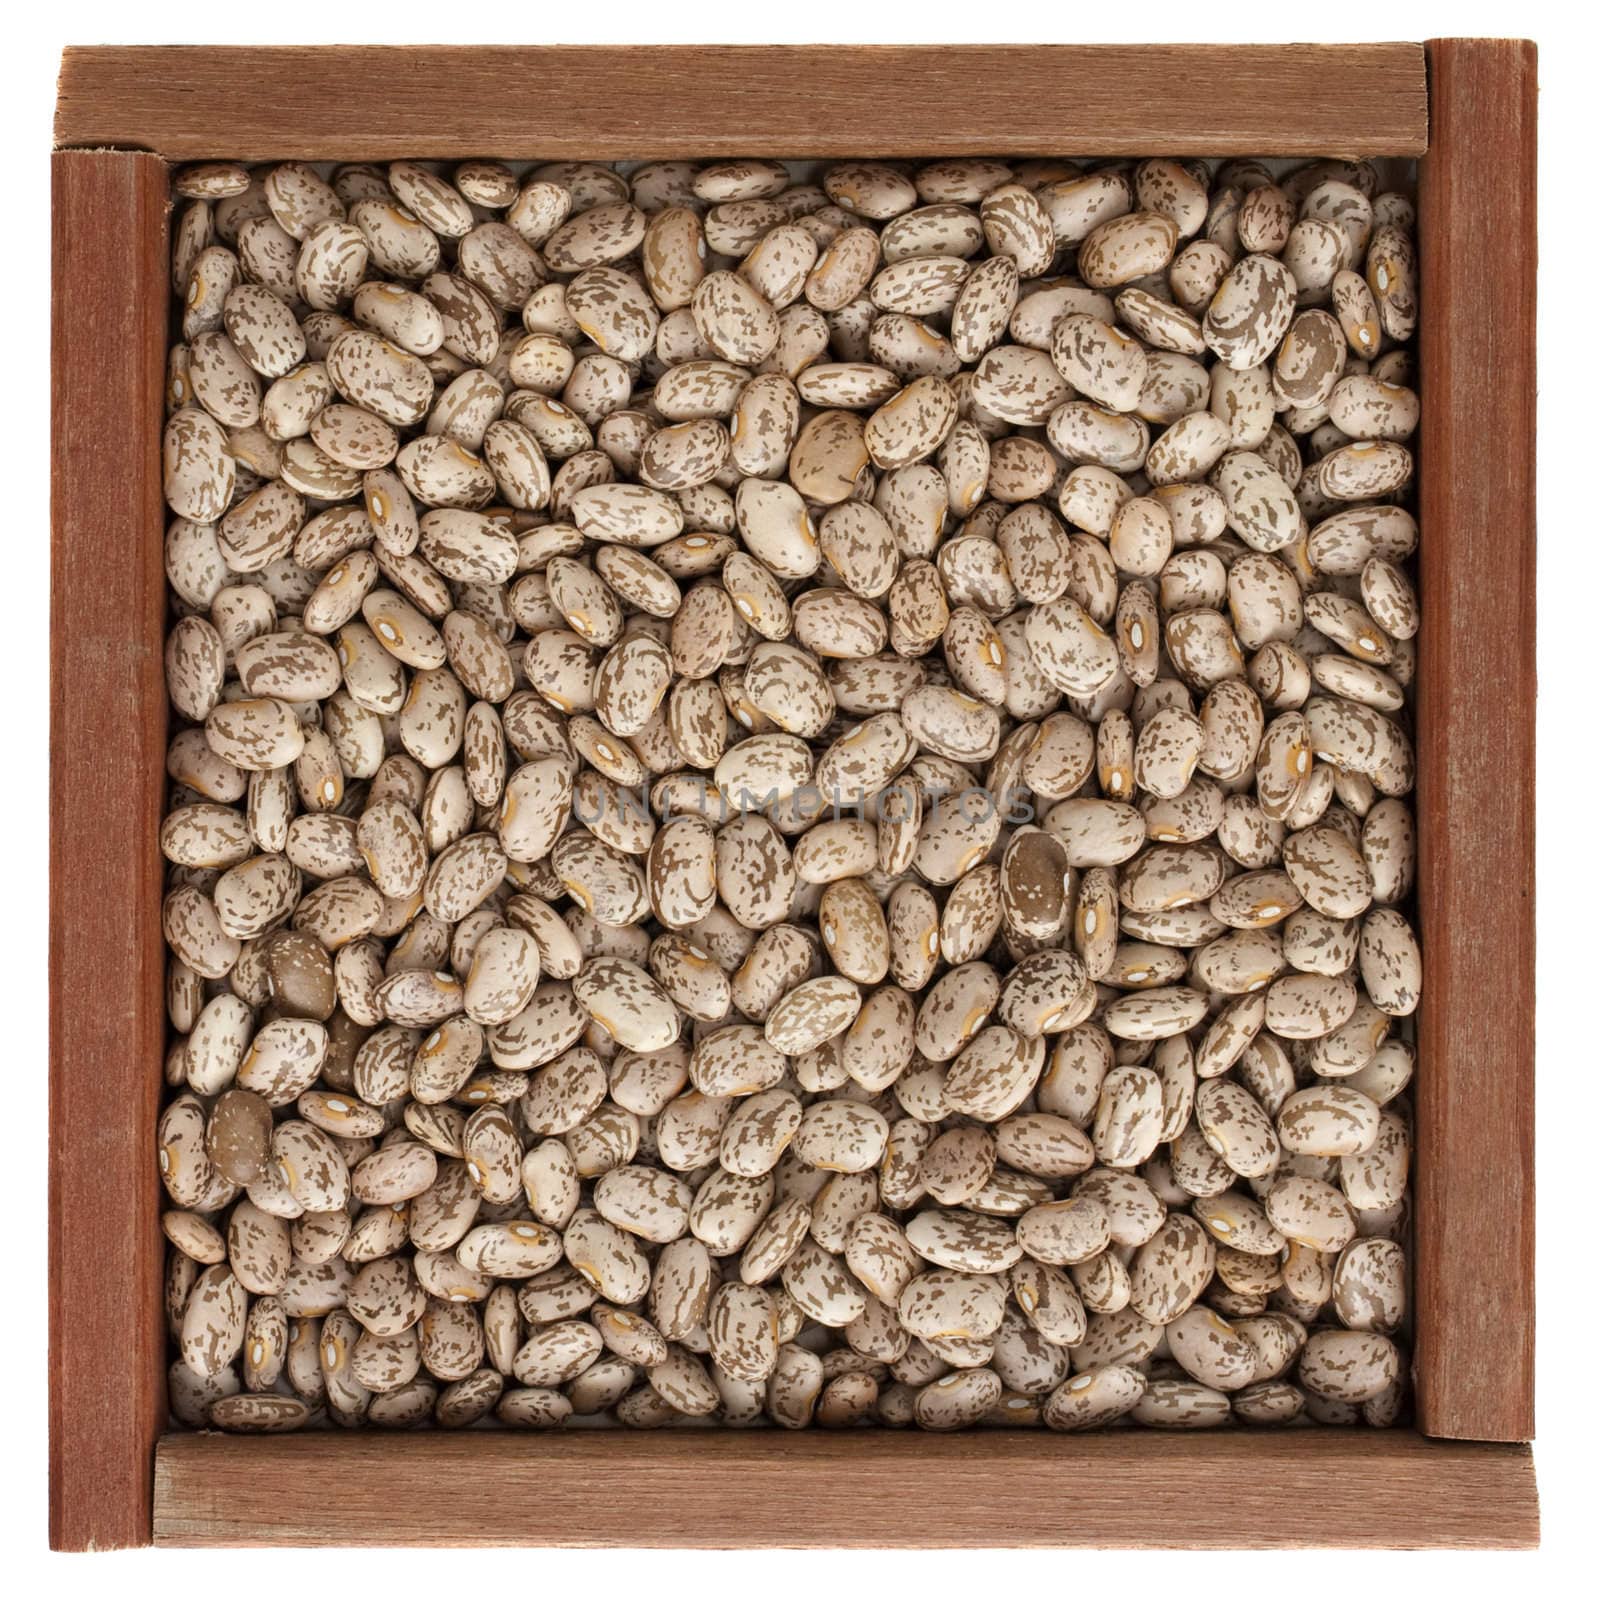 pinto beans in a square, rustic, wooden box isolated on white